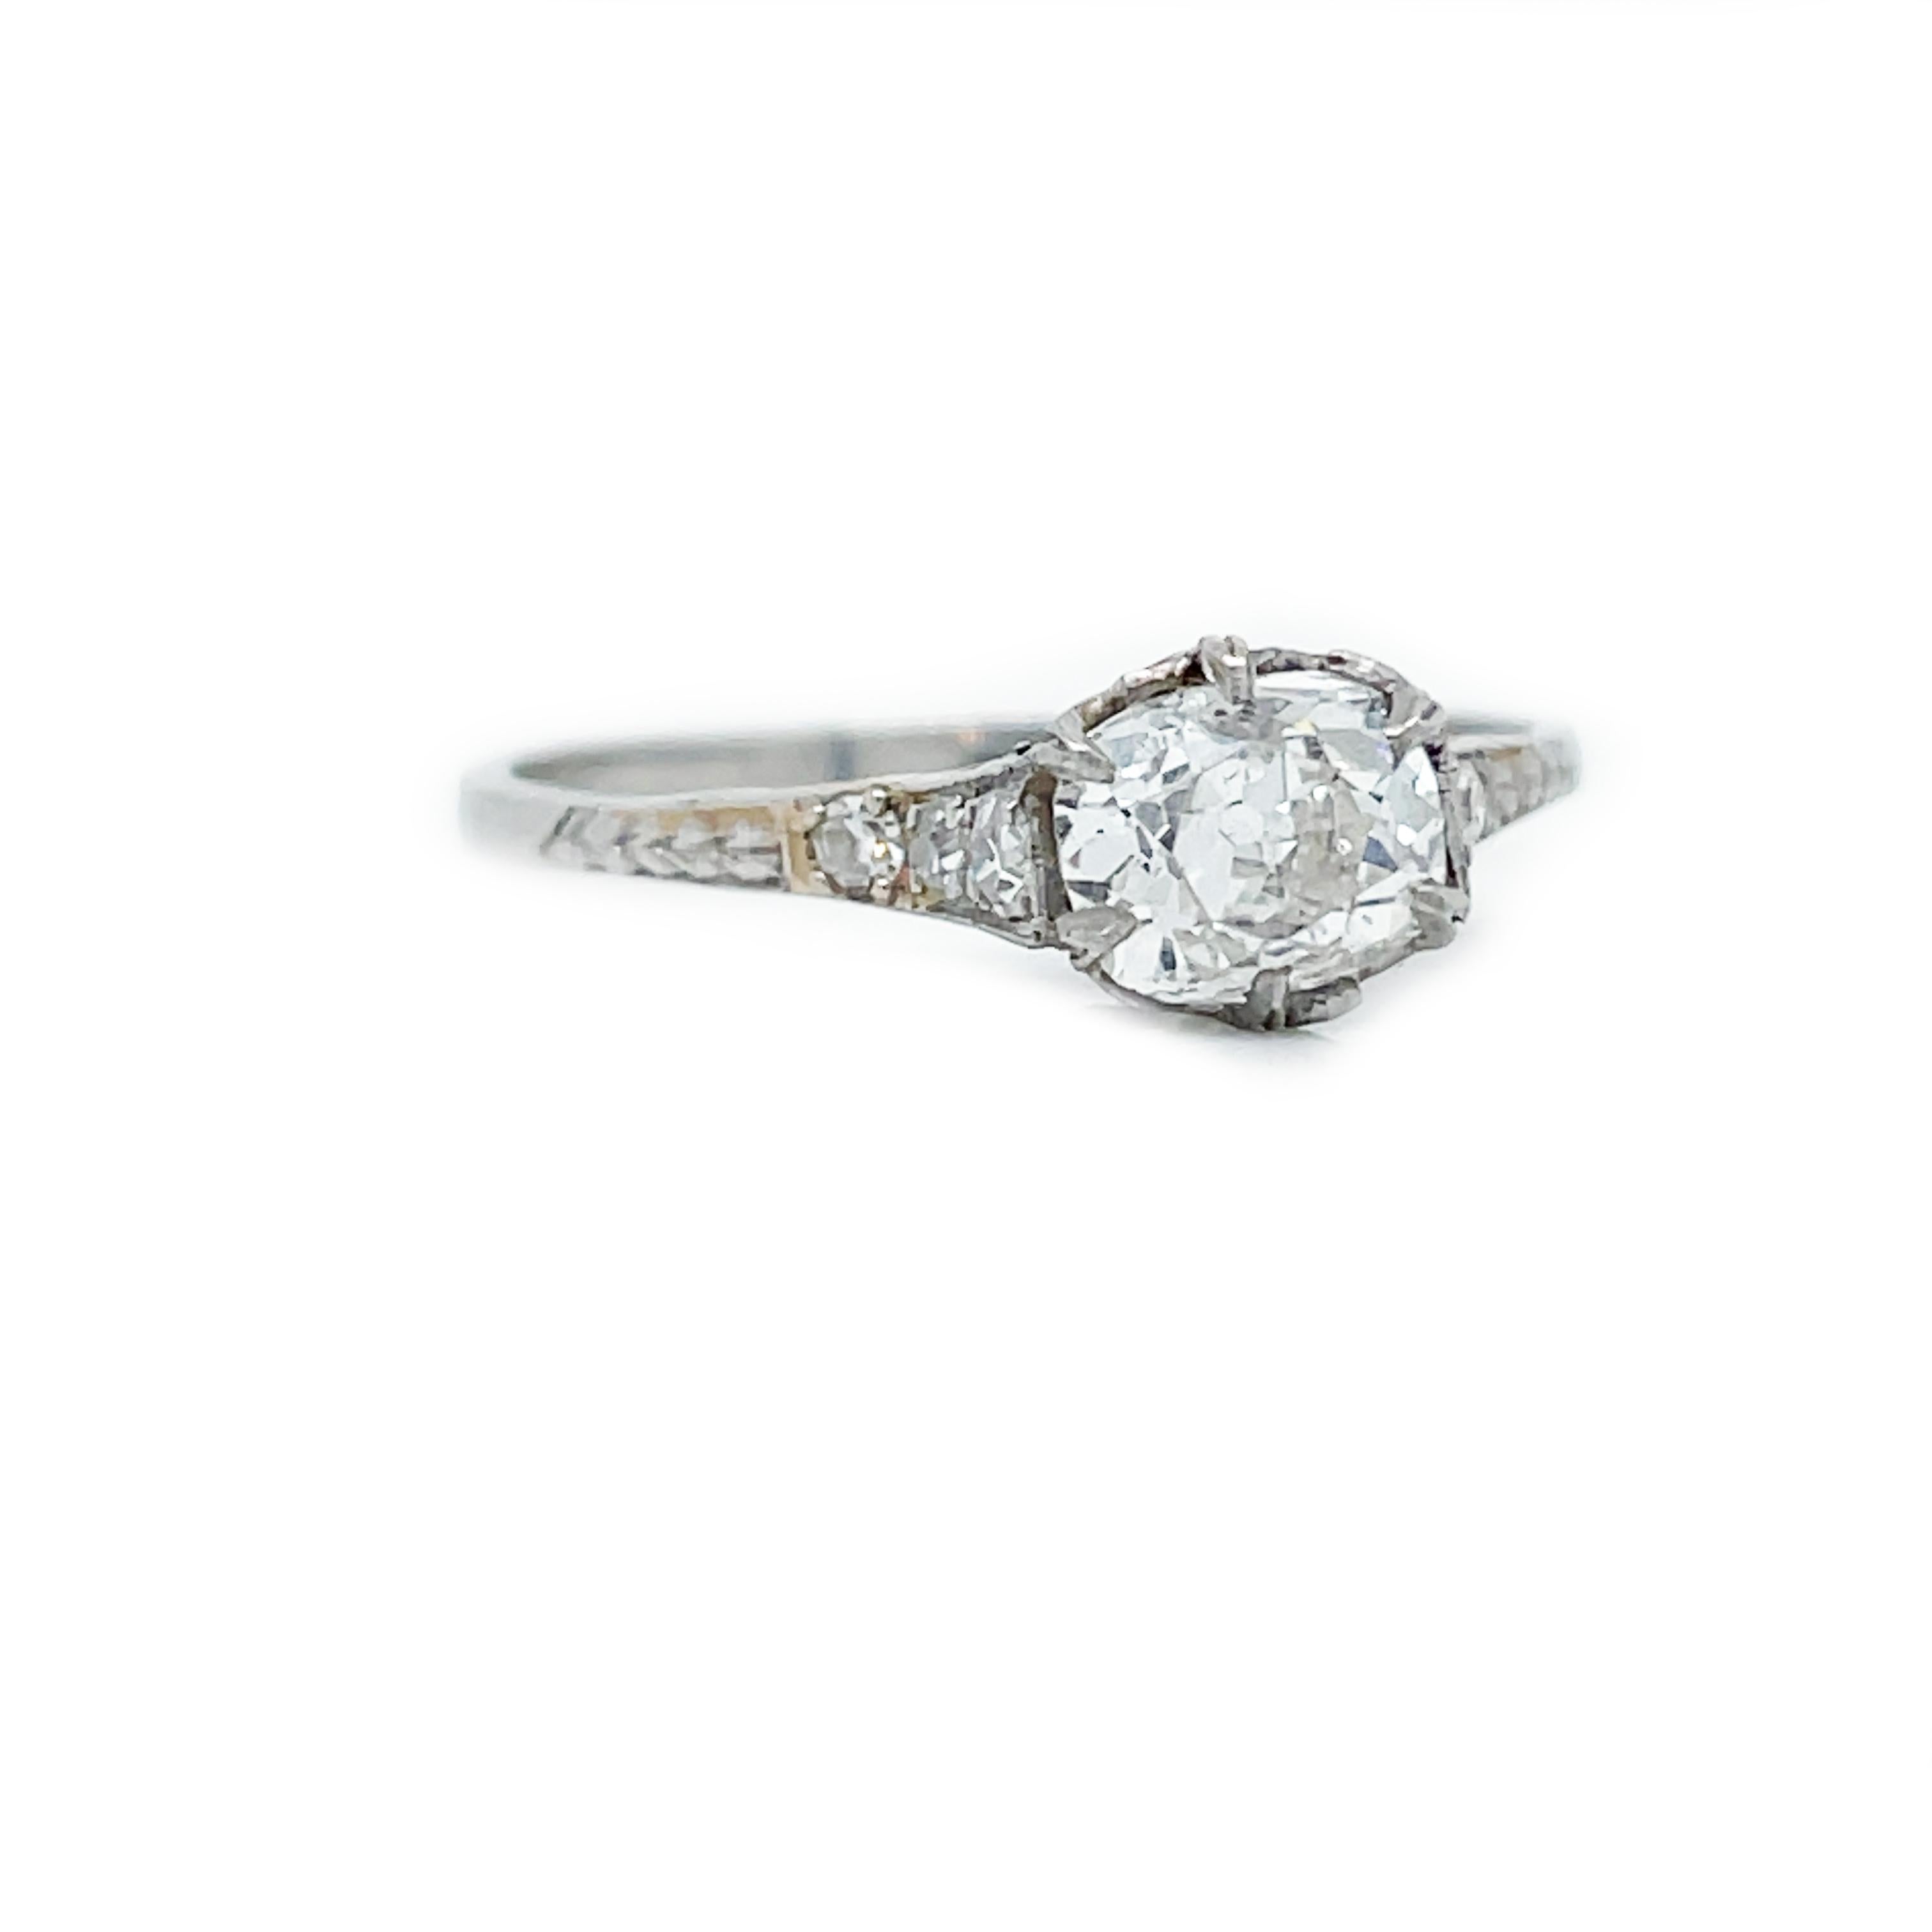 1910 Edwardian Old Mine Cut Diamond Platinum Ring In Good Condition For Sale In Lexington, KY